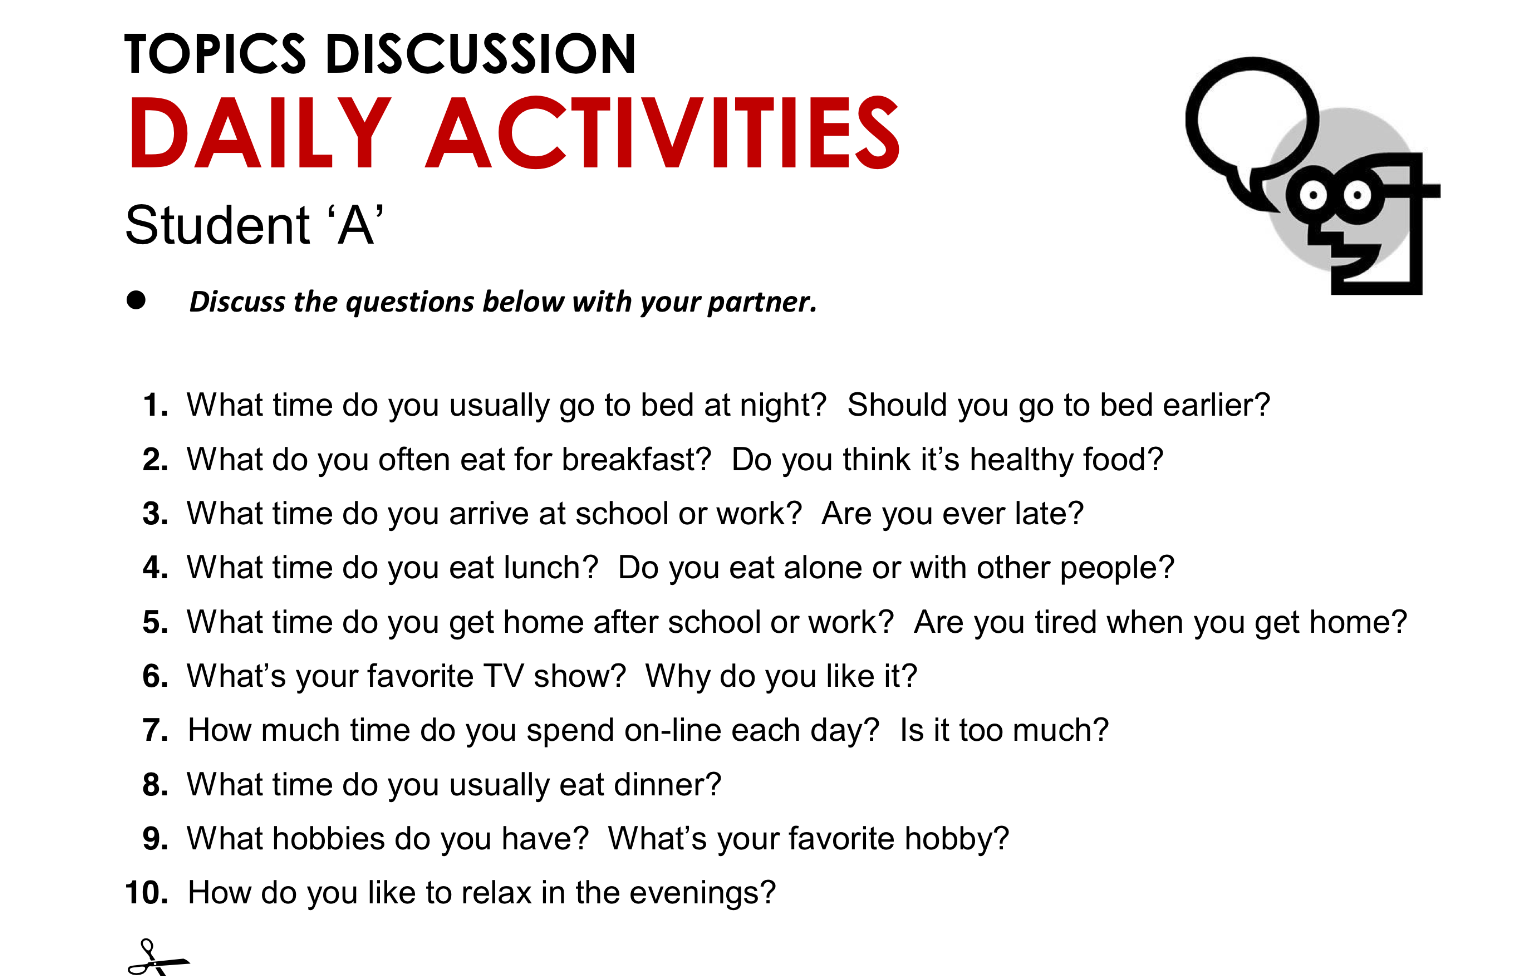 What with a partner answer. Английский topics for discussion. Questions for discussion. Questions for discussion in English. Topics to discuss in English.